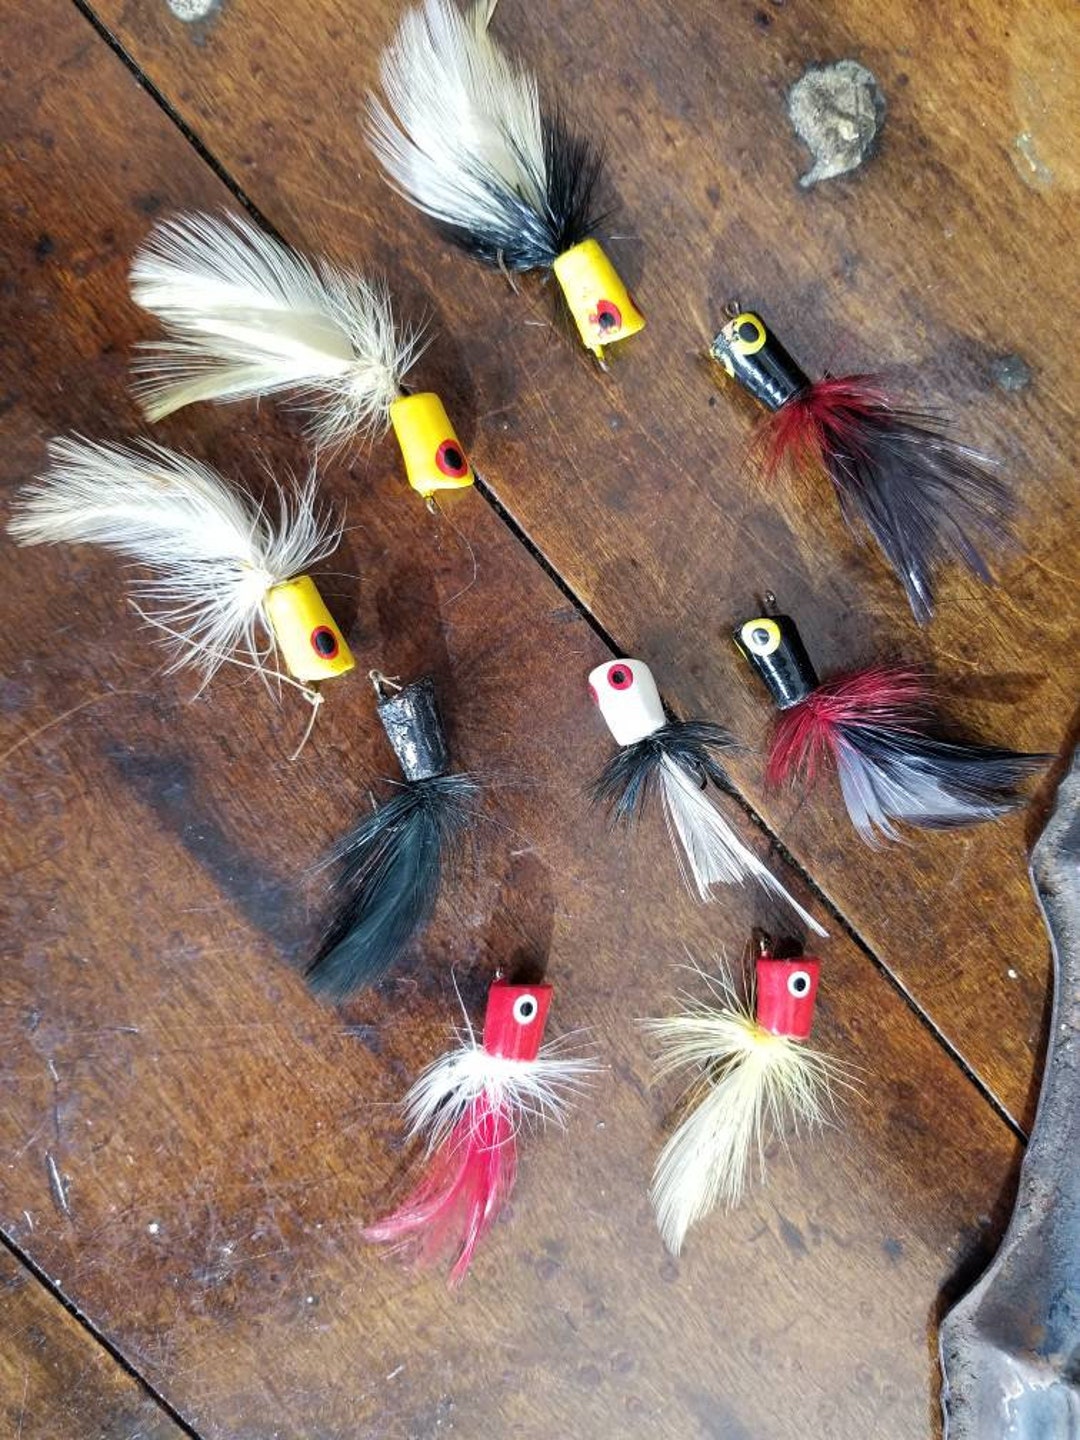 Vintage Feather Poppers Bass Fly Rod Fishing Luretackle Bait Nine Total  Poppers With Feathersred Yellow Black White Unknown Maker -  Canada